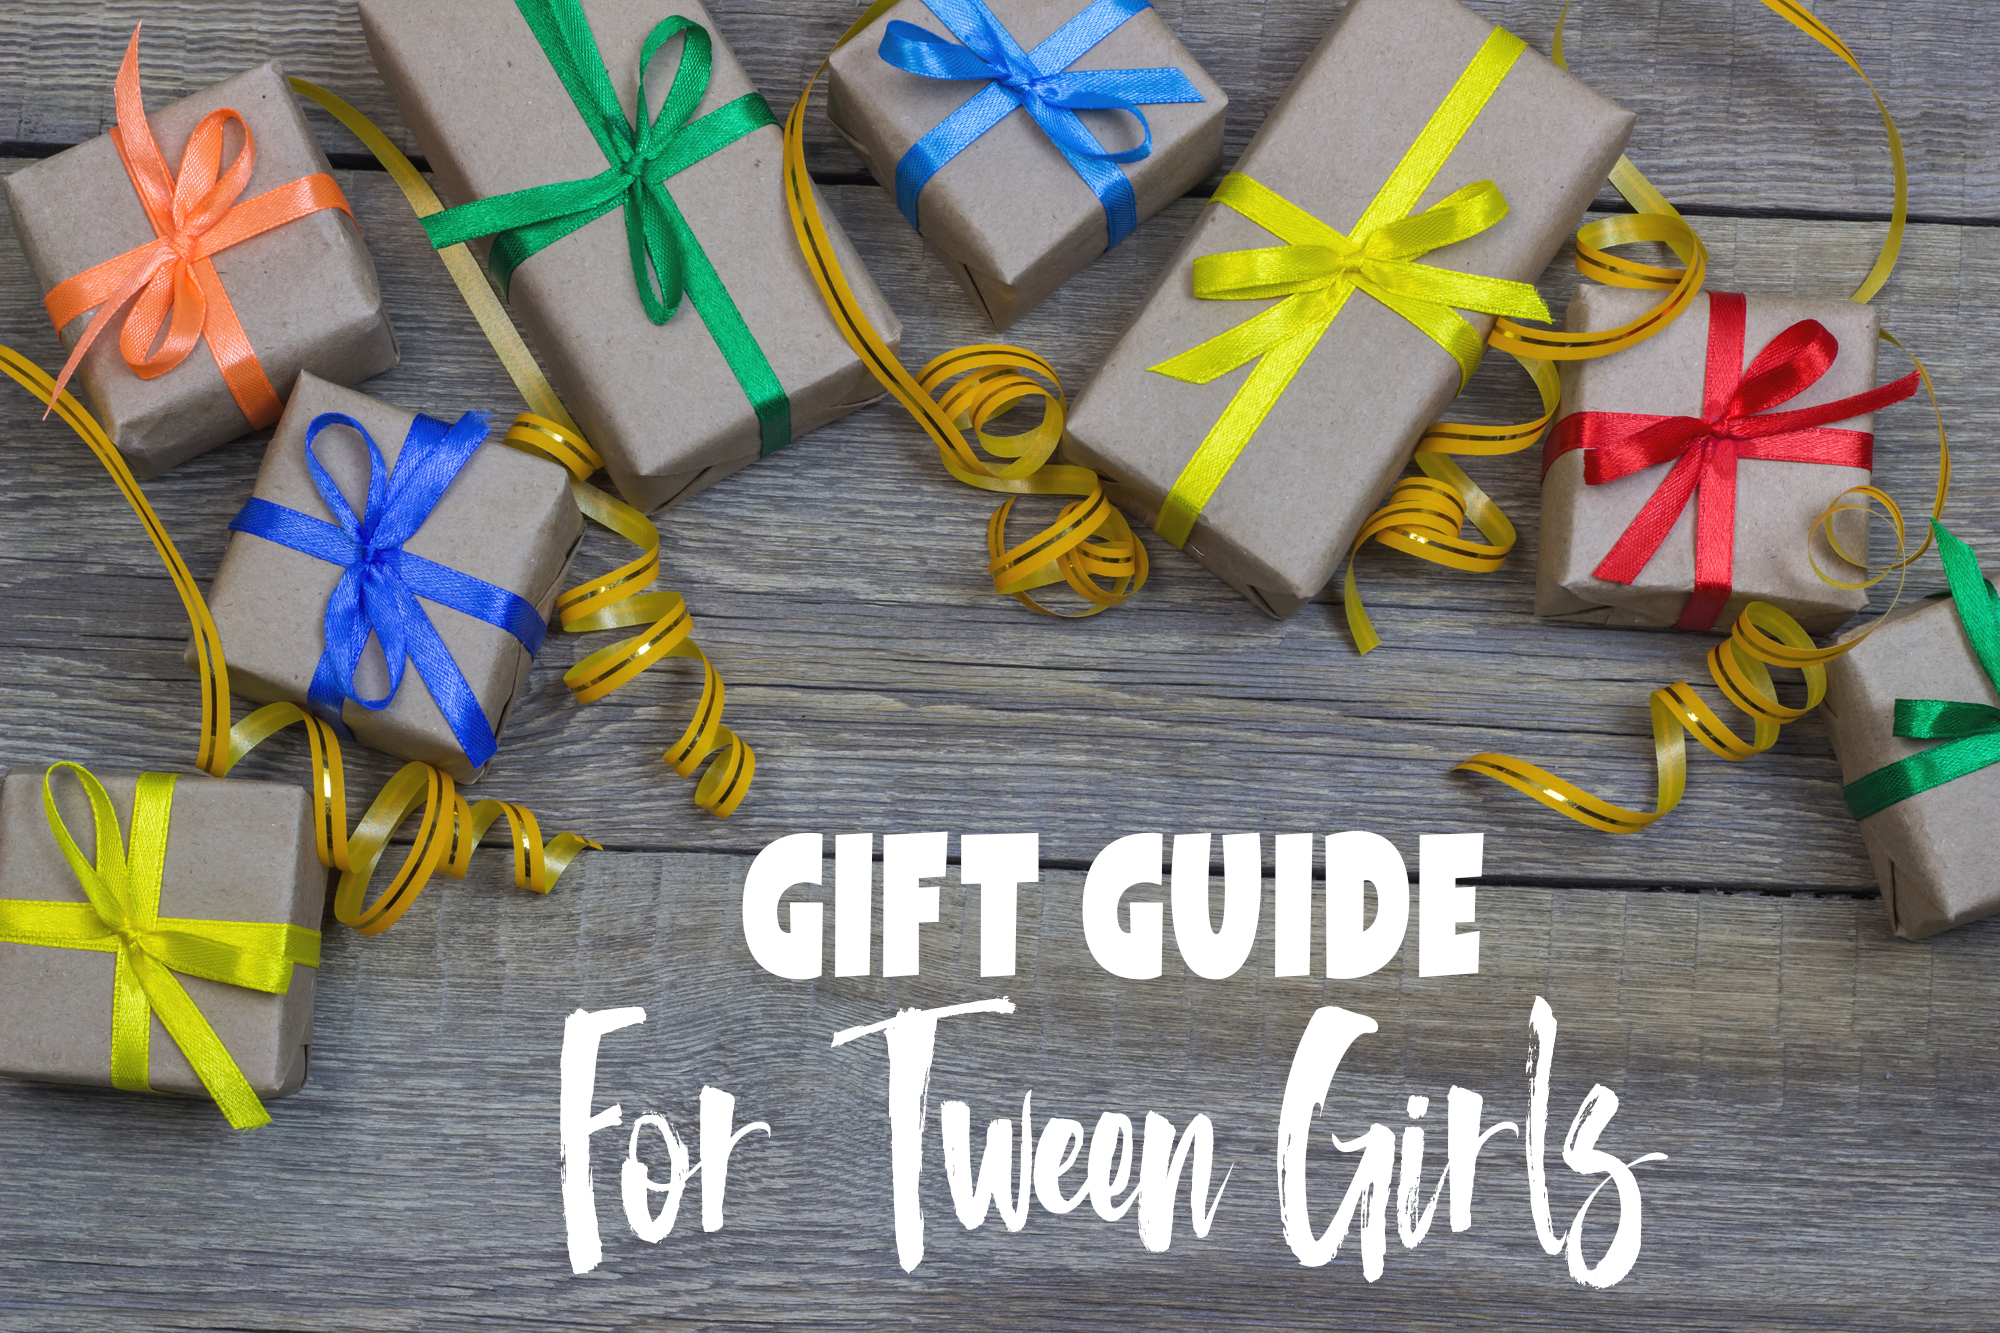 Birthday Card Ideas For Teenage Girl Gift Ideas For Tween Girls They Will Love 2019 Gift Guide Raising